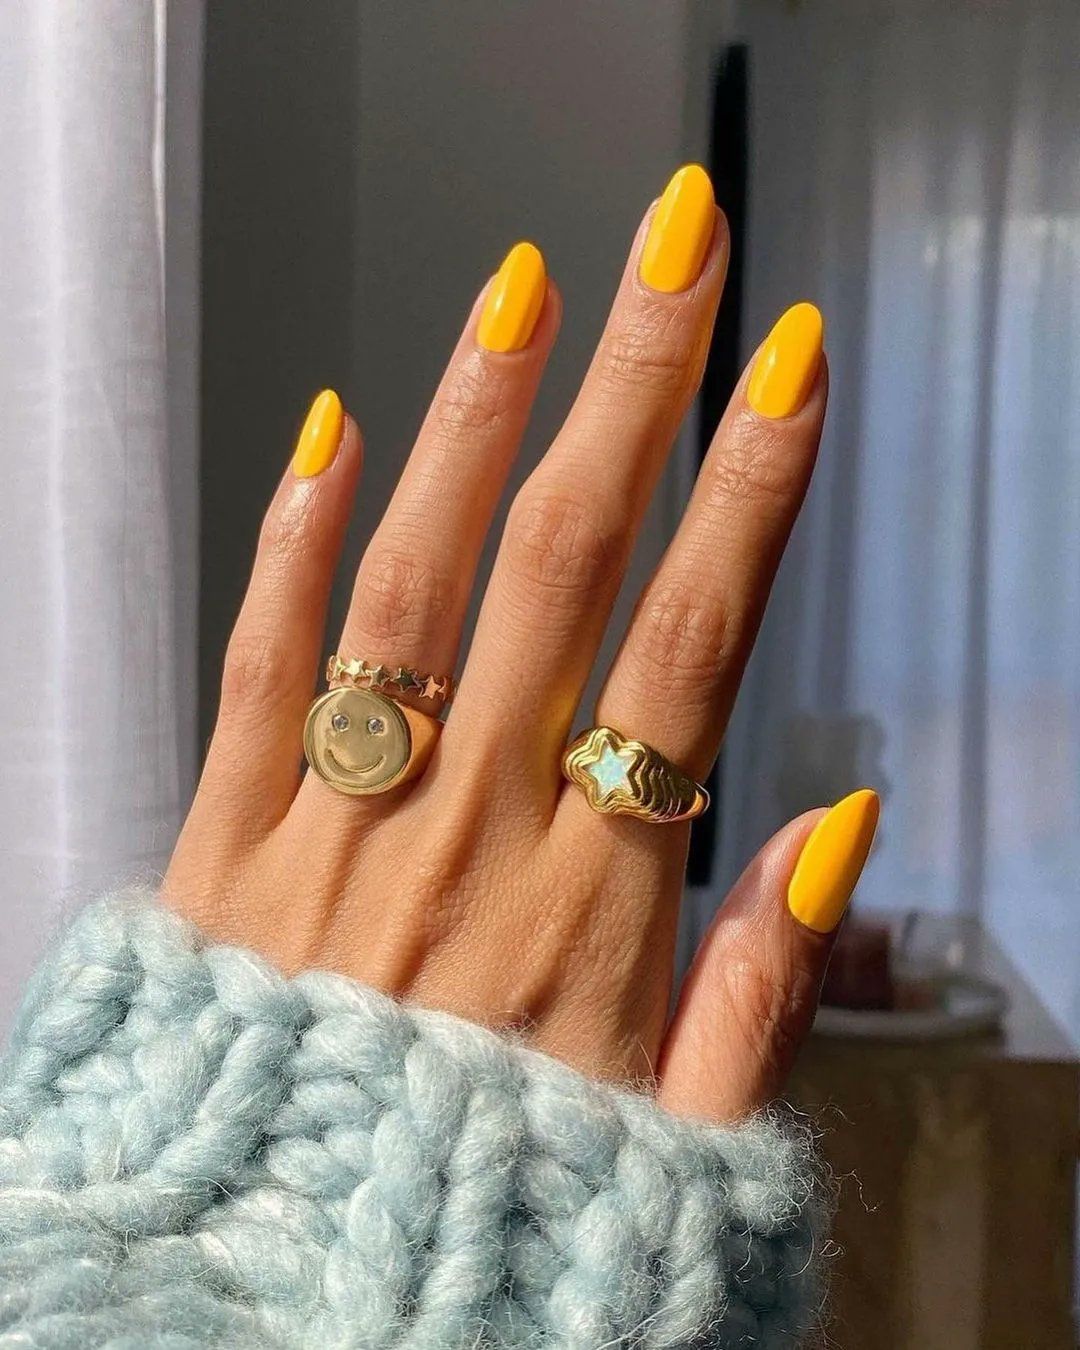 Fall Yellow Nails 18 Ideas: Embrace the Warmth and Vibrancy